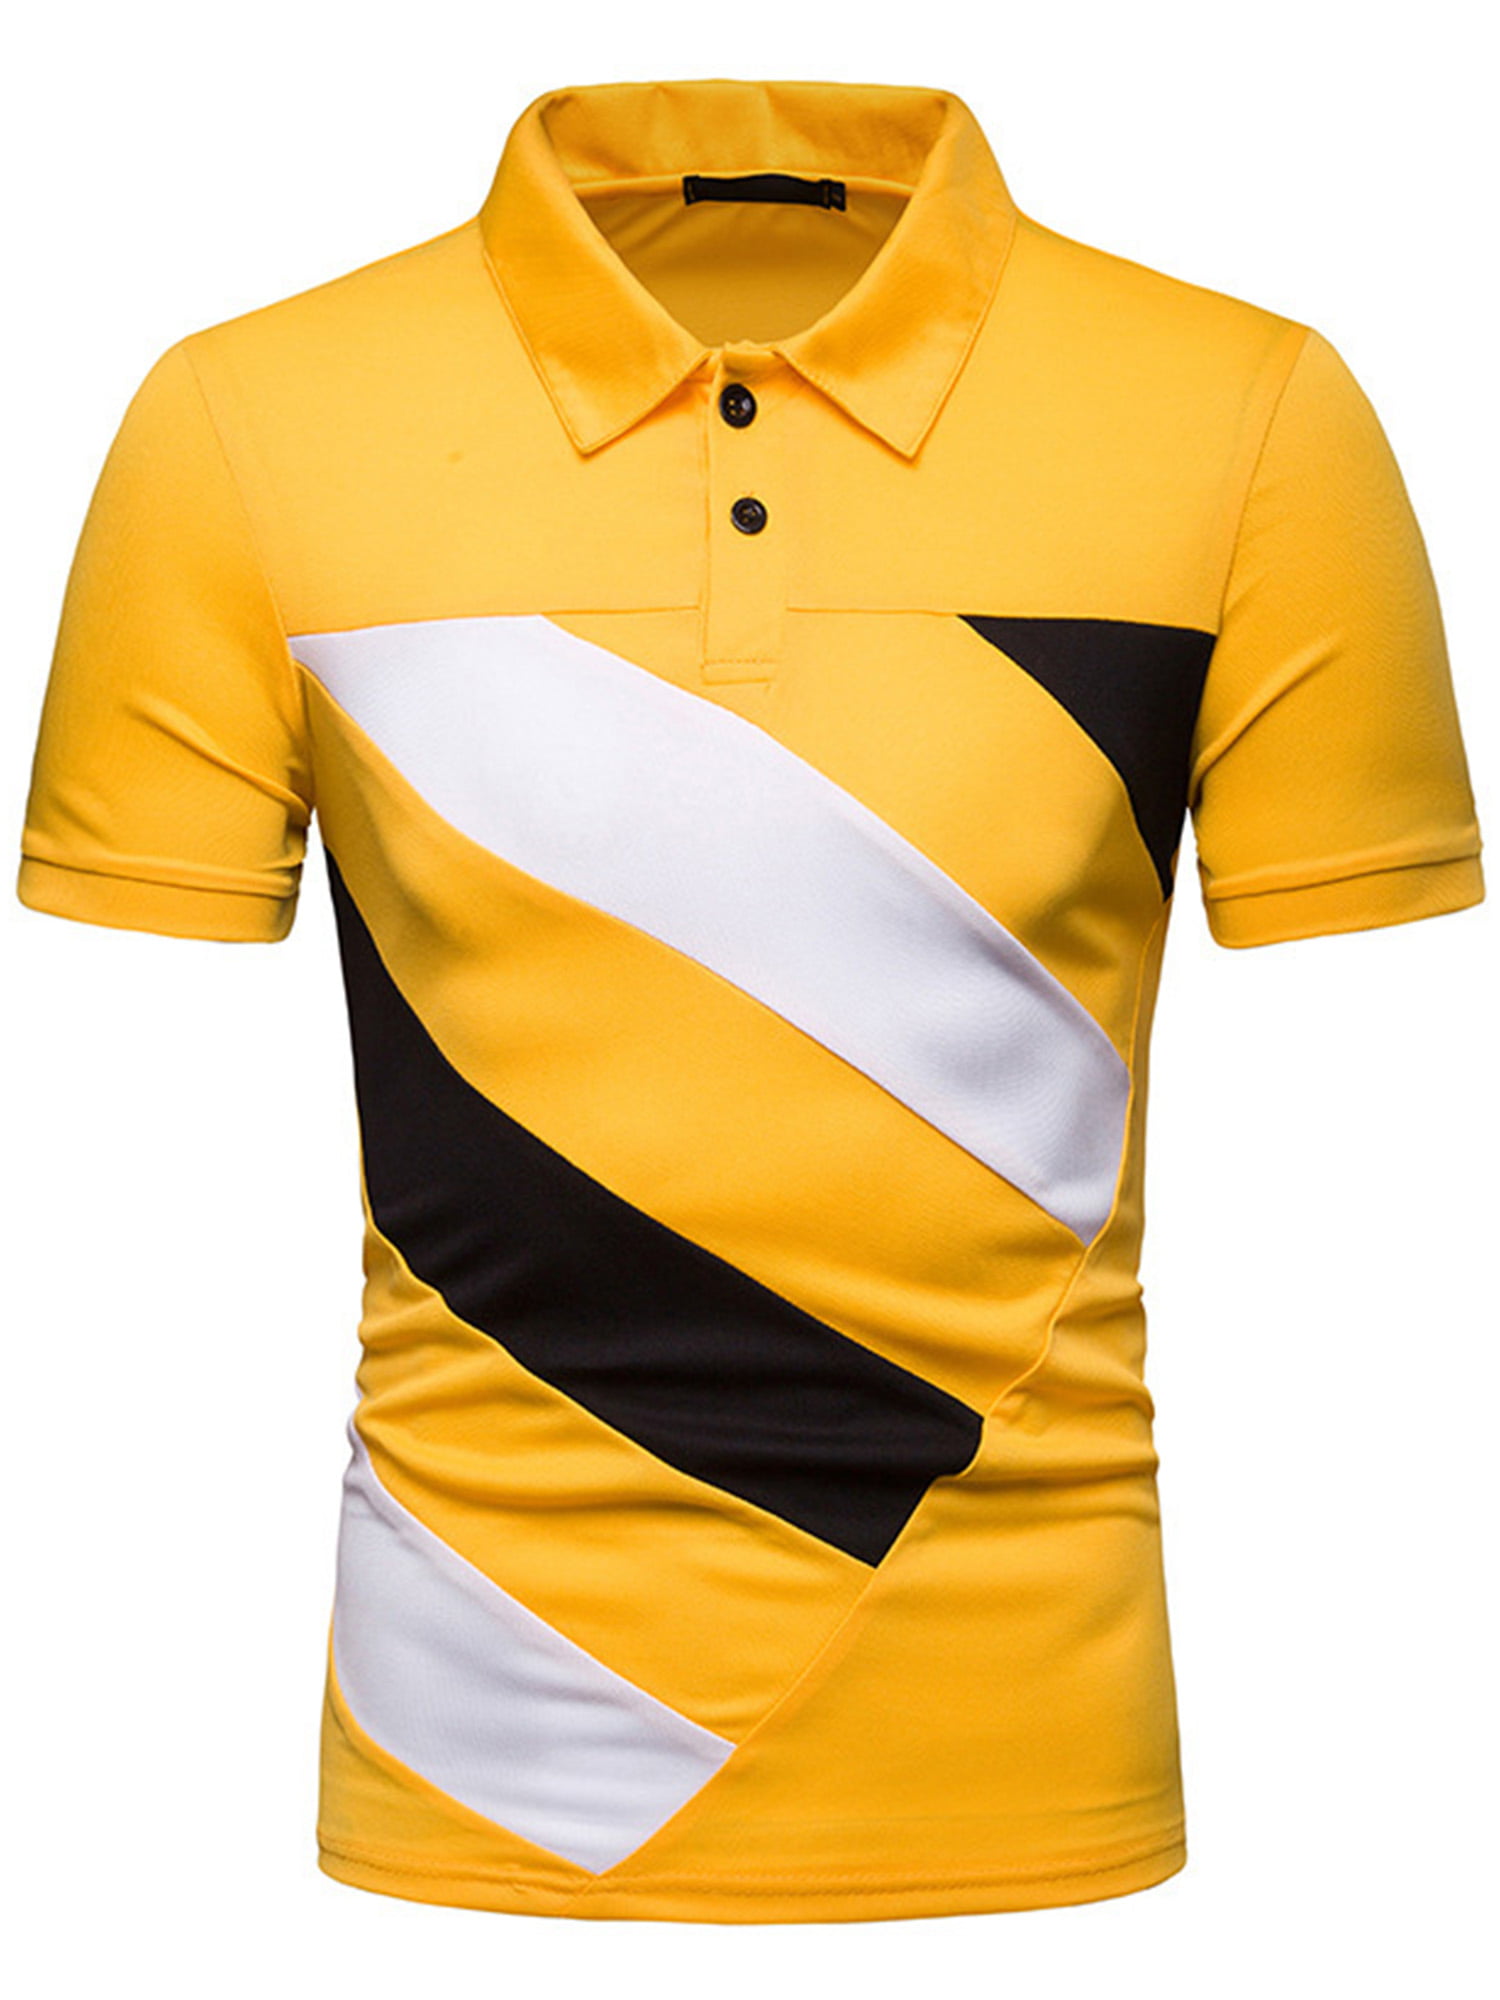 Details about   Men's Striped Short Sleeved Casual Holiday Jersey Summer Polo T-Shirt Tops S-2XL 